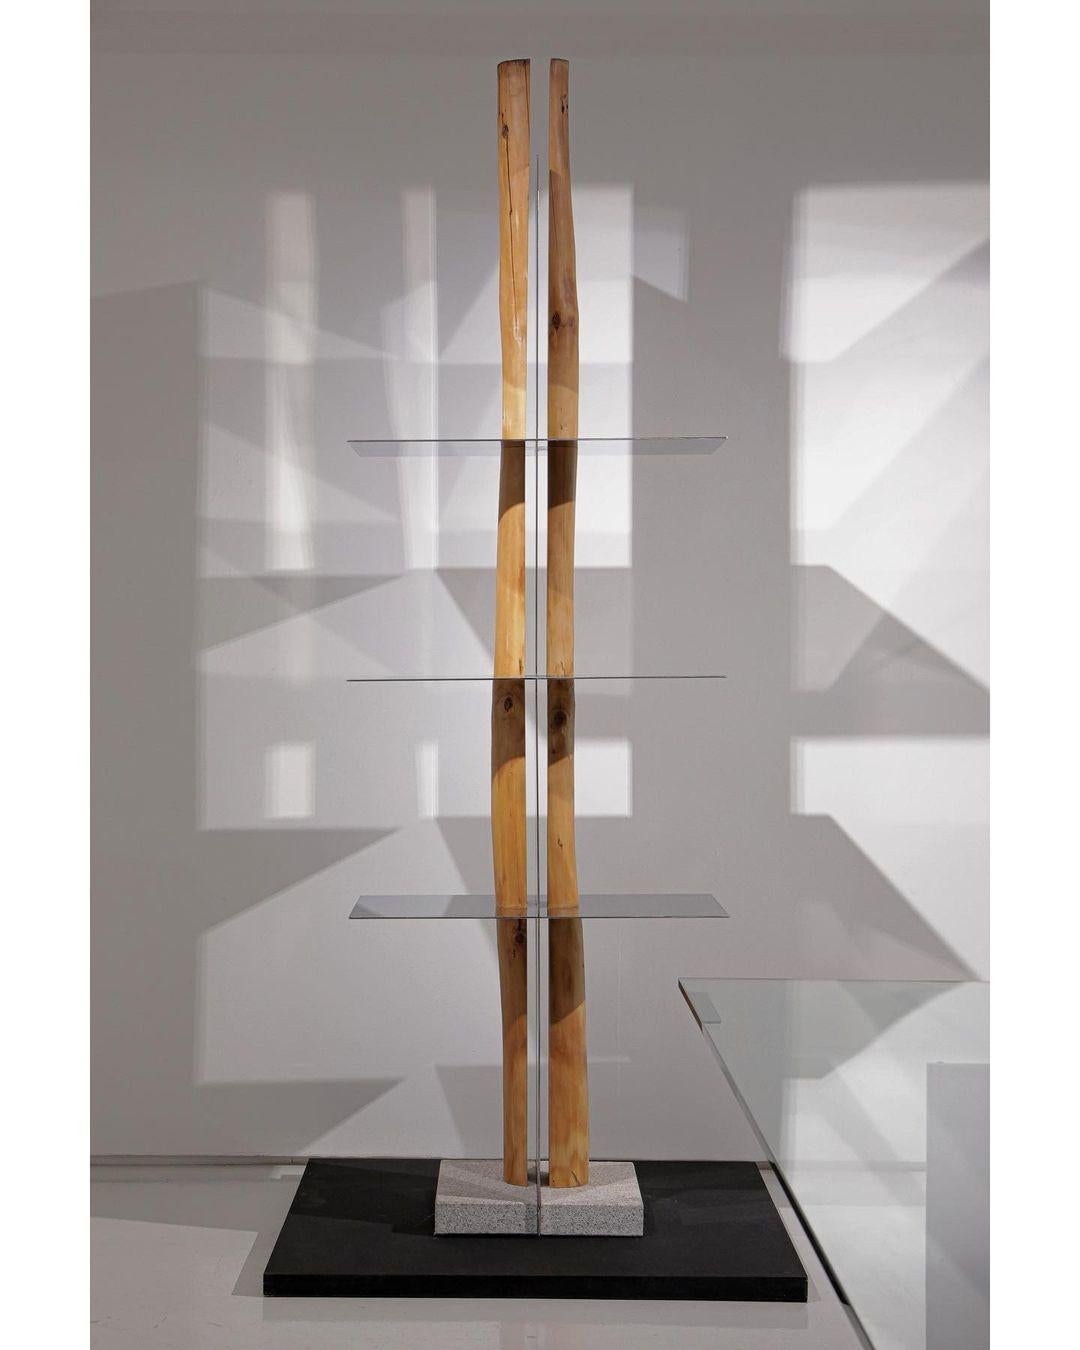 Korean Hanok split shelf by Shinkyu Shon.
Dimensions: 40 x 75 x 230cm
Made with Korean old pine tree and polished stainless steel.


Shon Shin-kyu graduated from Sangmyung University with a Bachelor's degree in Furniture design, and is pursuing